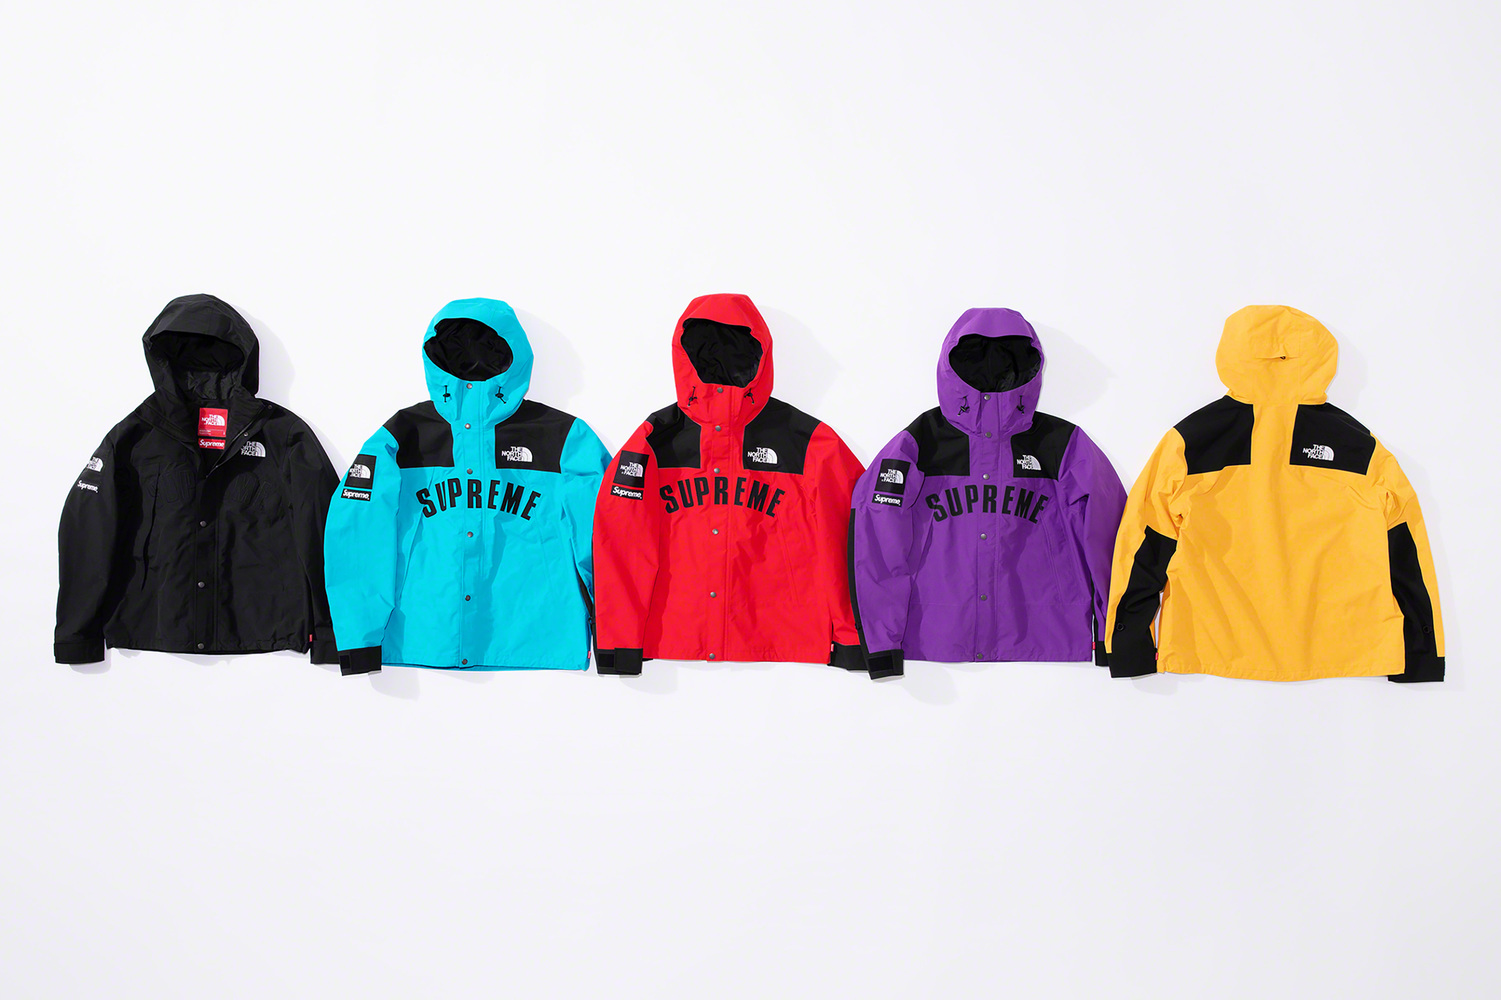 Supreme X The North Face SS19 - The Swish